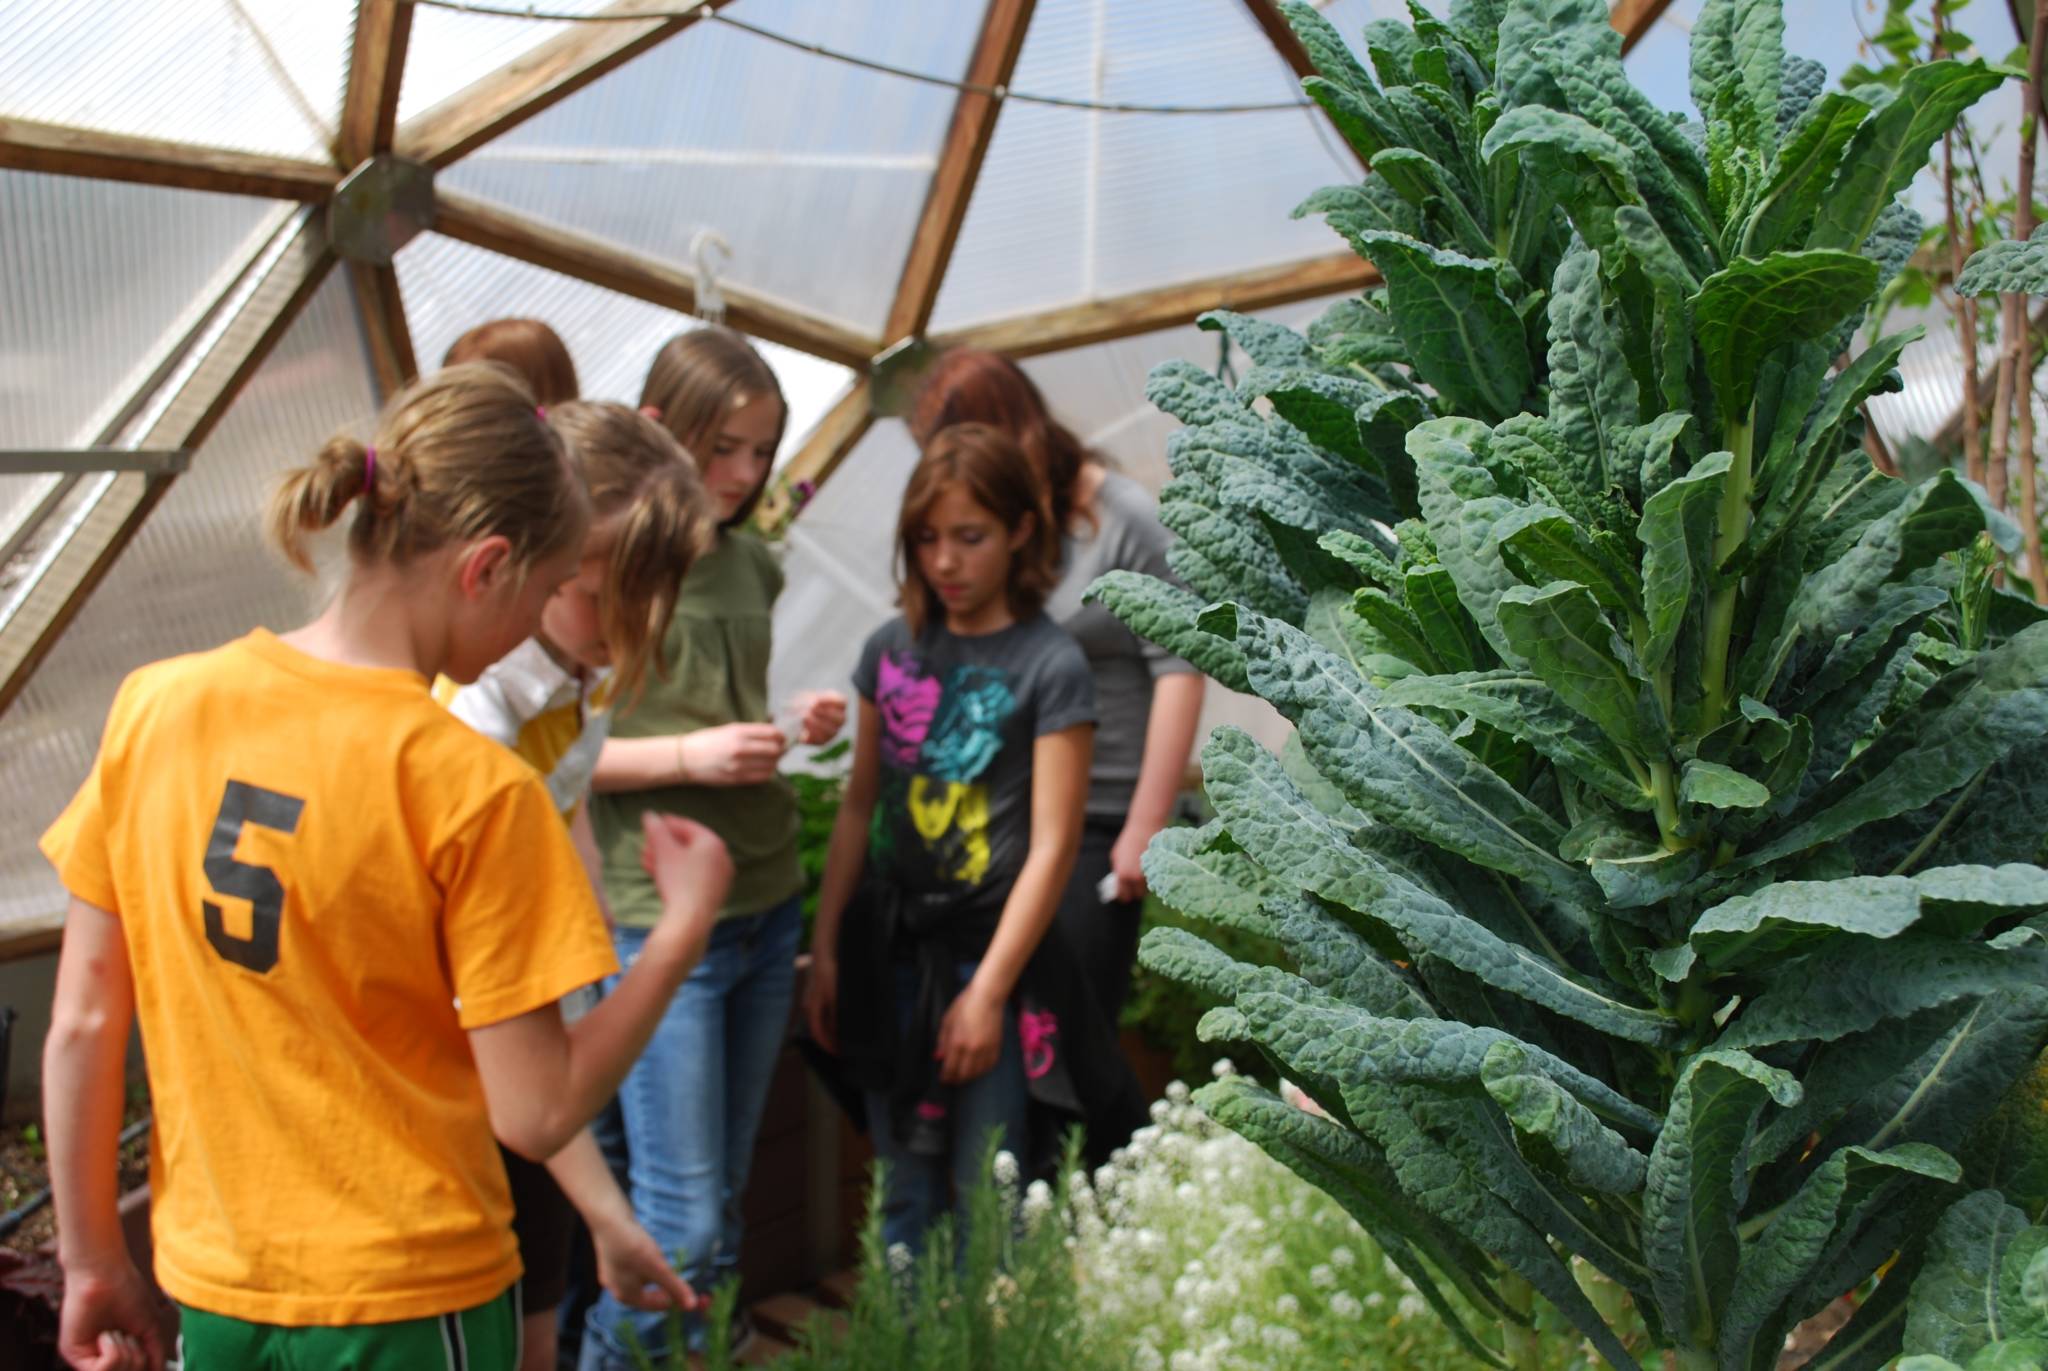 large kale plant growing in the foreground with kids in the background in a growing dome greenhouse